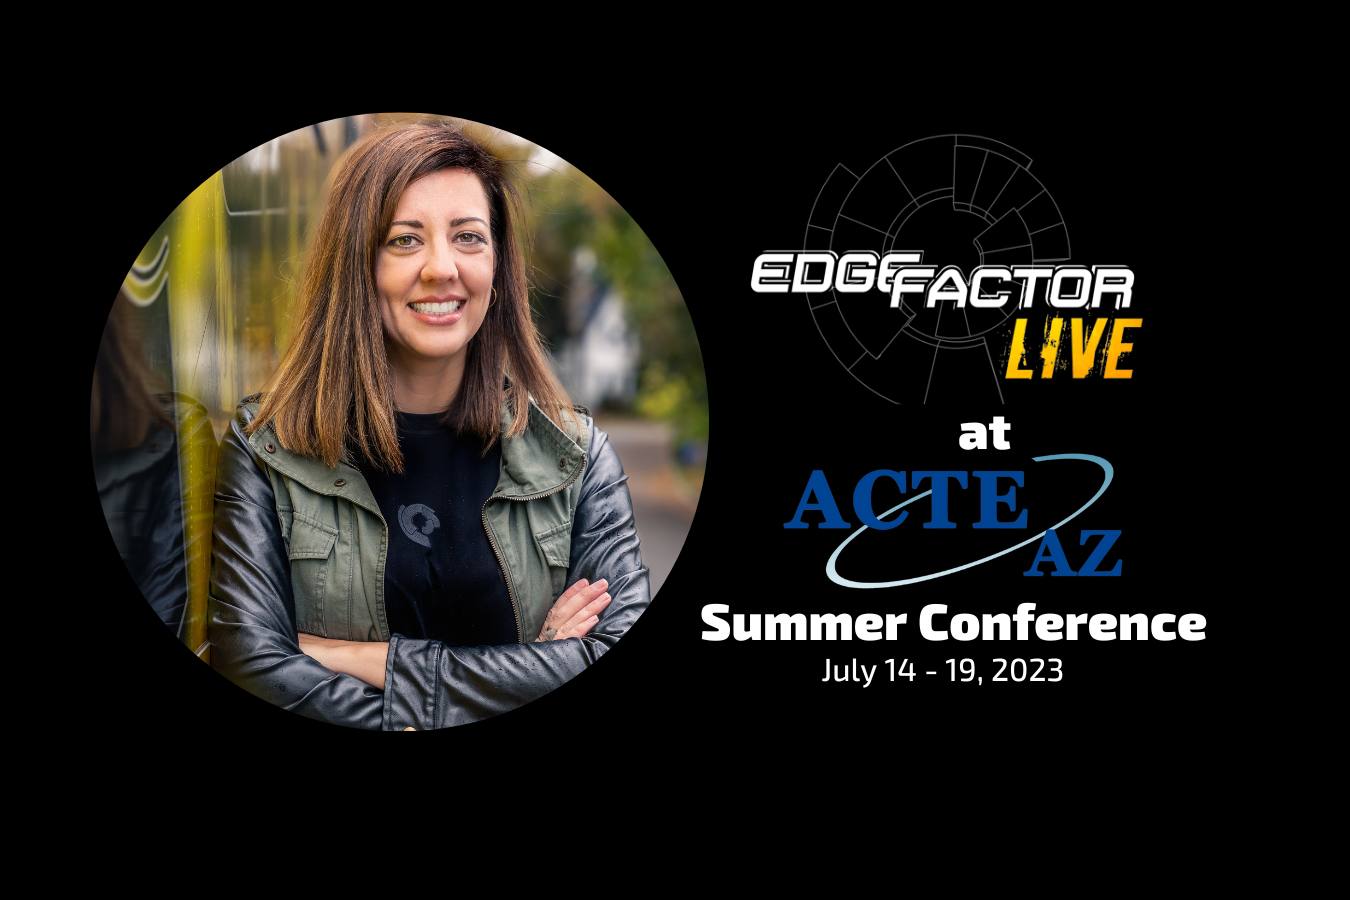 Larissa Hofman, Vice President of Edge Factor will be at the ACTEAZ Summer Conference